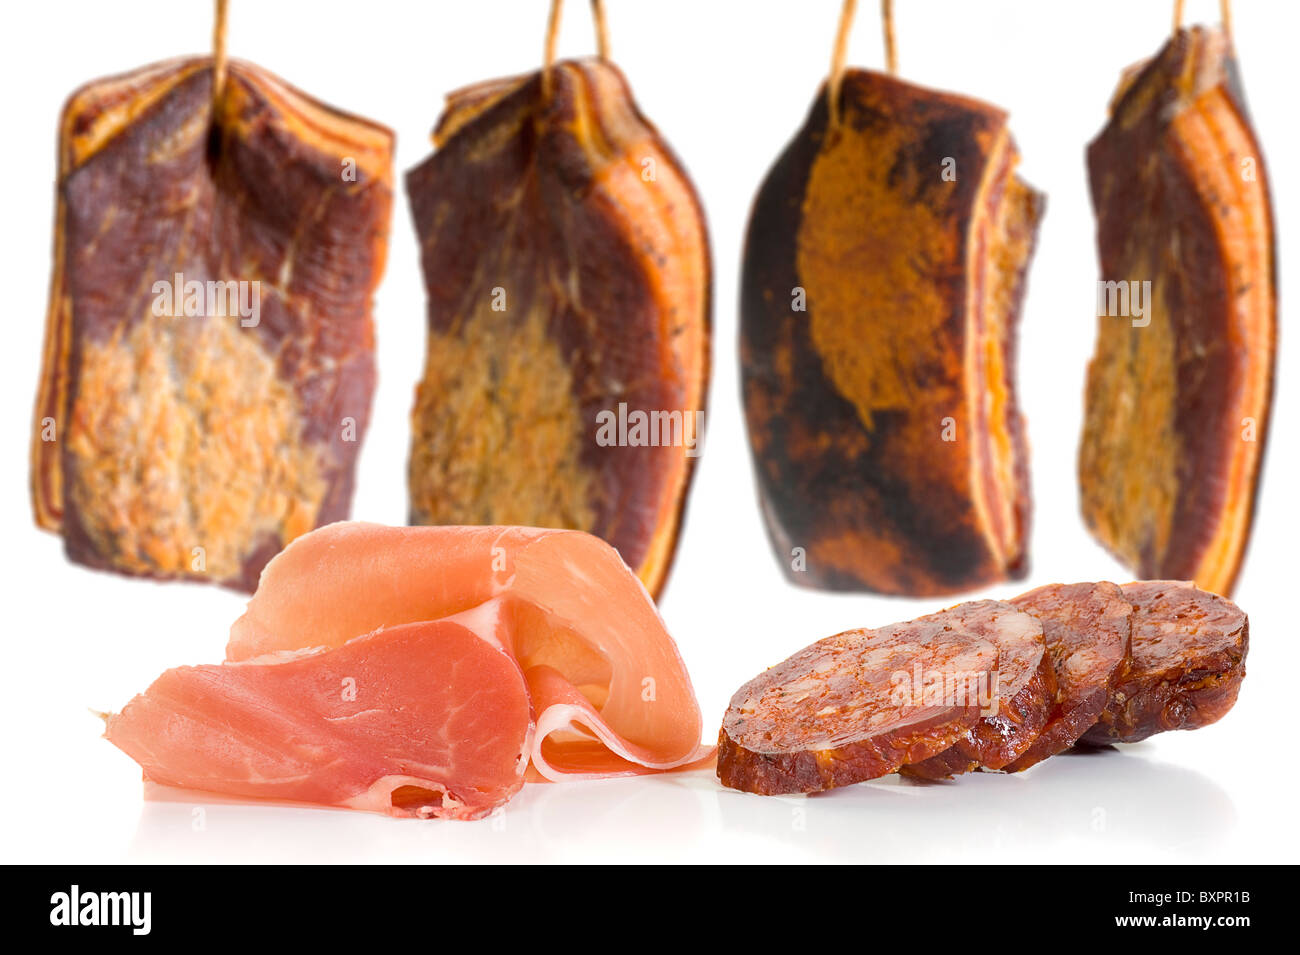 Slice of prosciutto and salami with bacon in background Stock Photo